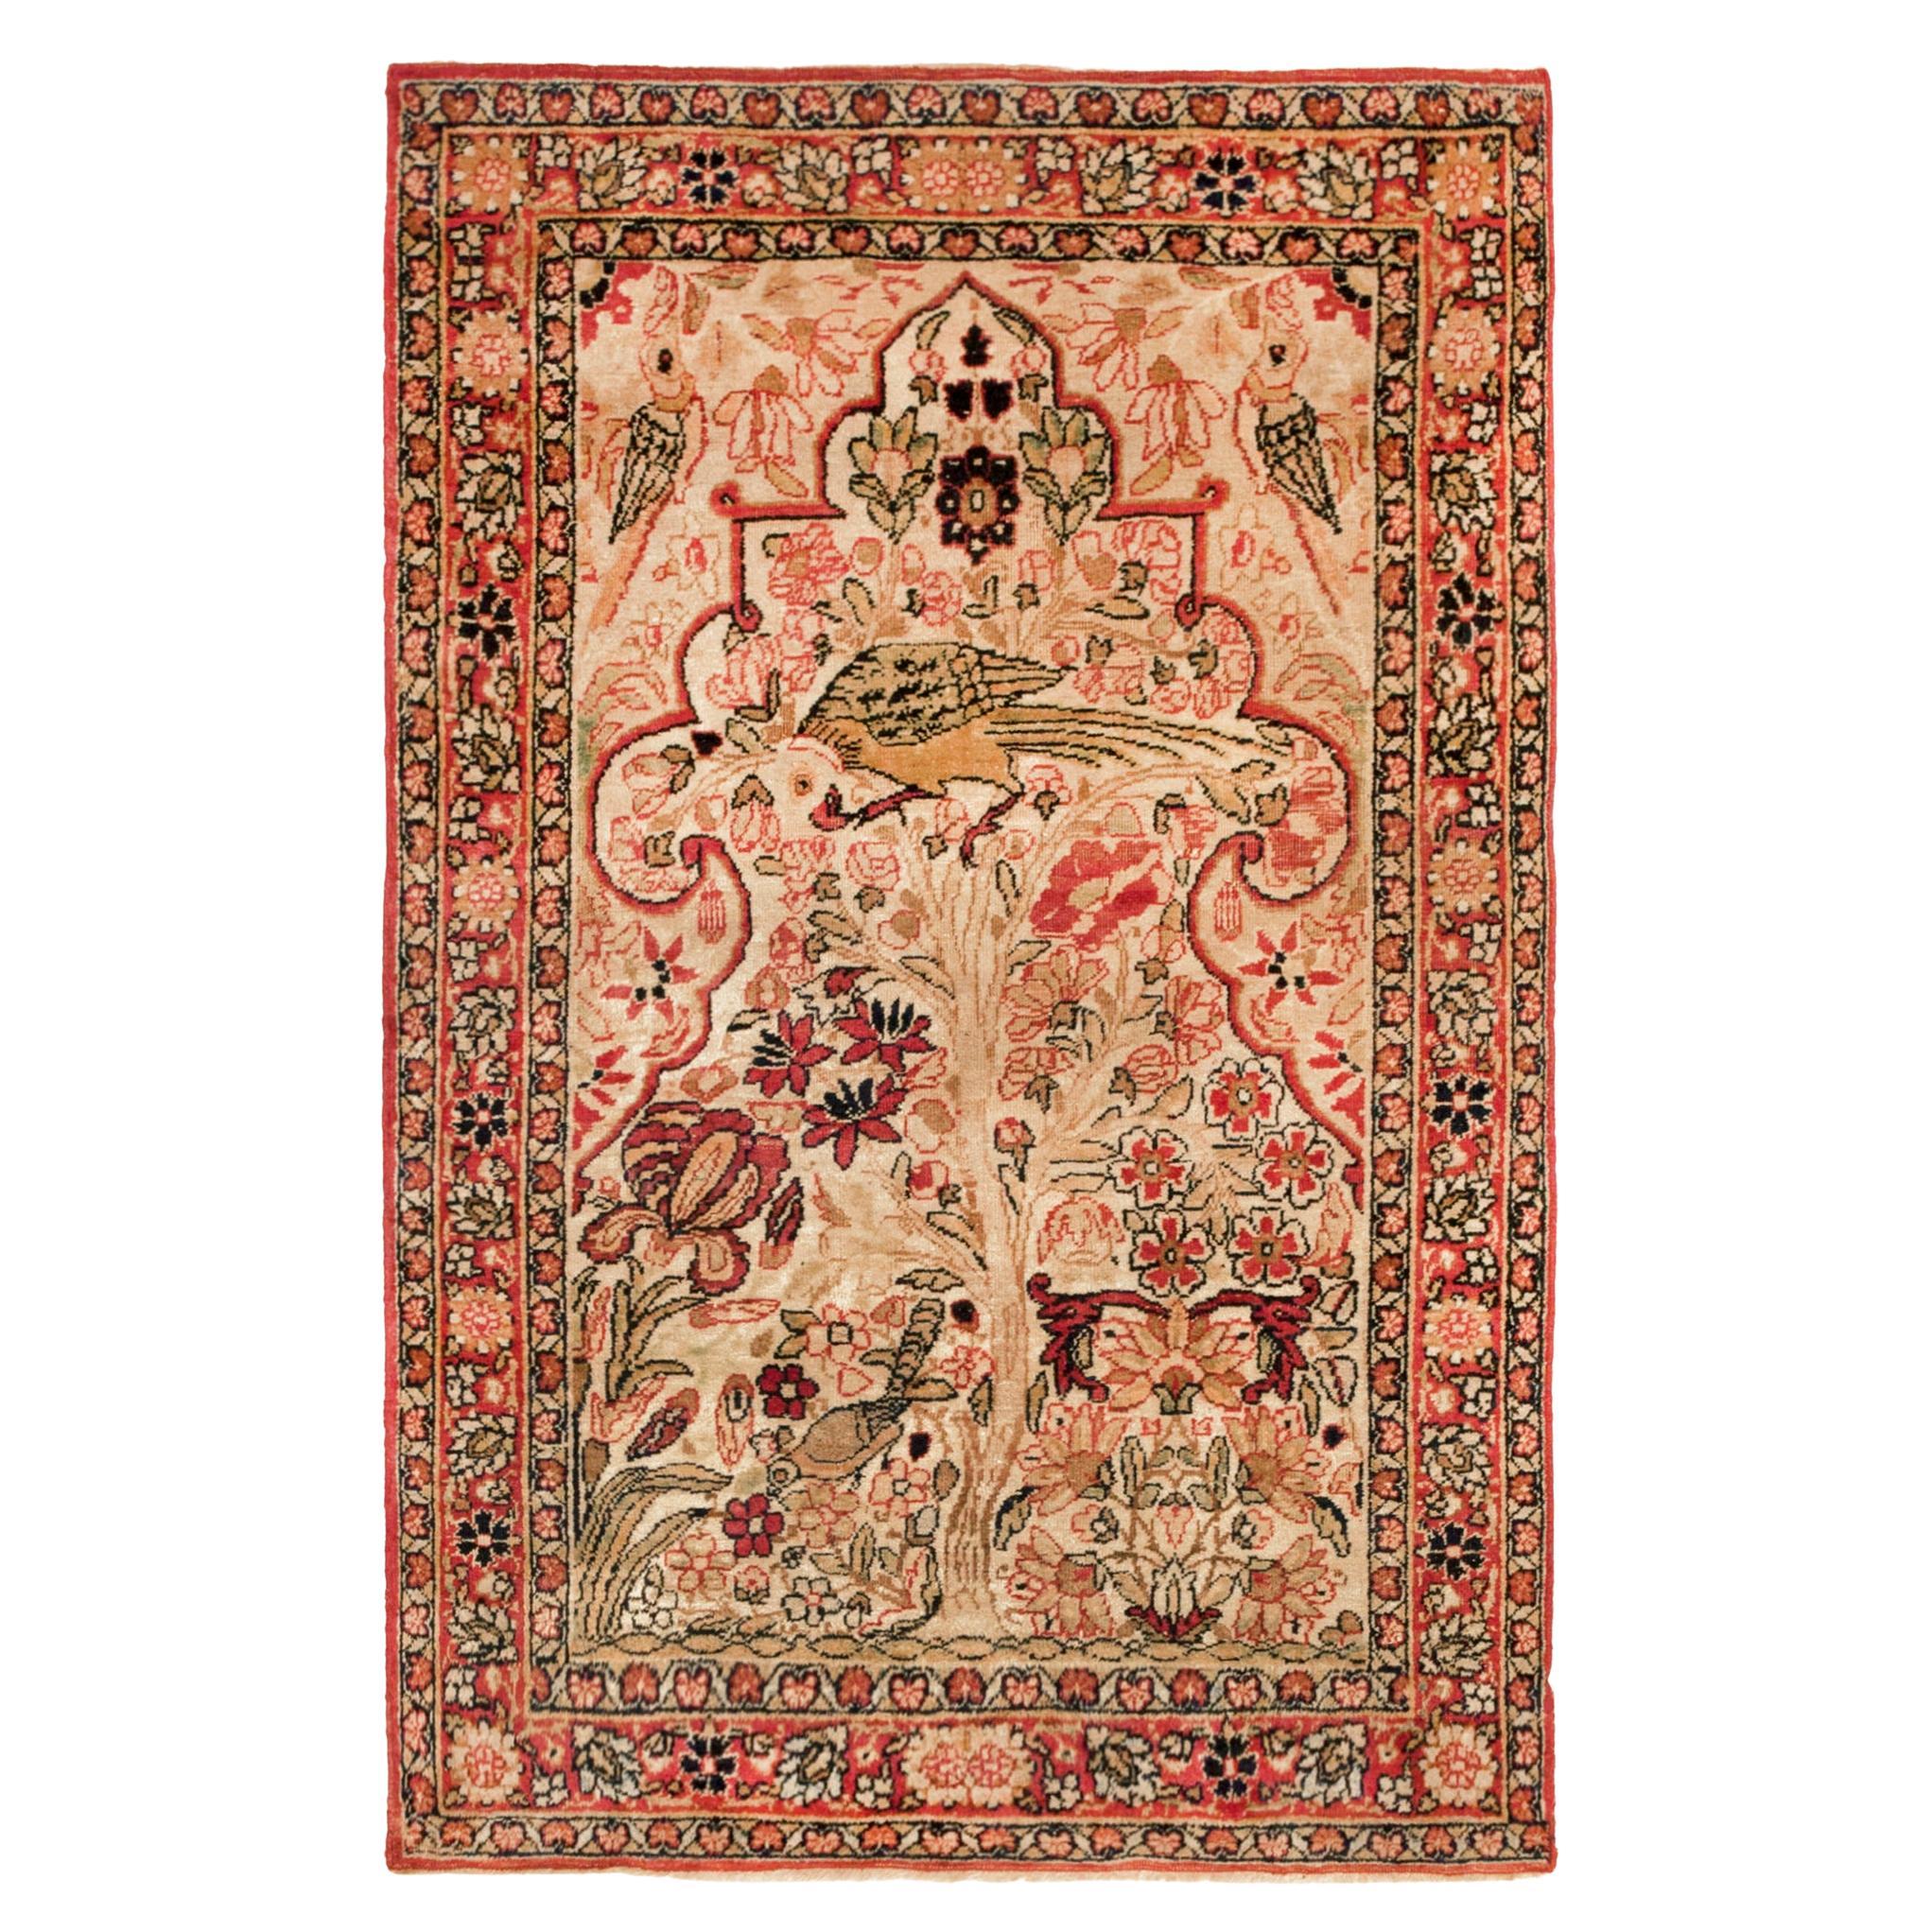 Antique Persian Lavar Oriental Carpet, in Small Size, with a Tree of Life Design